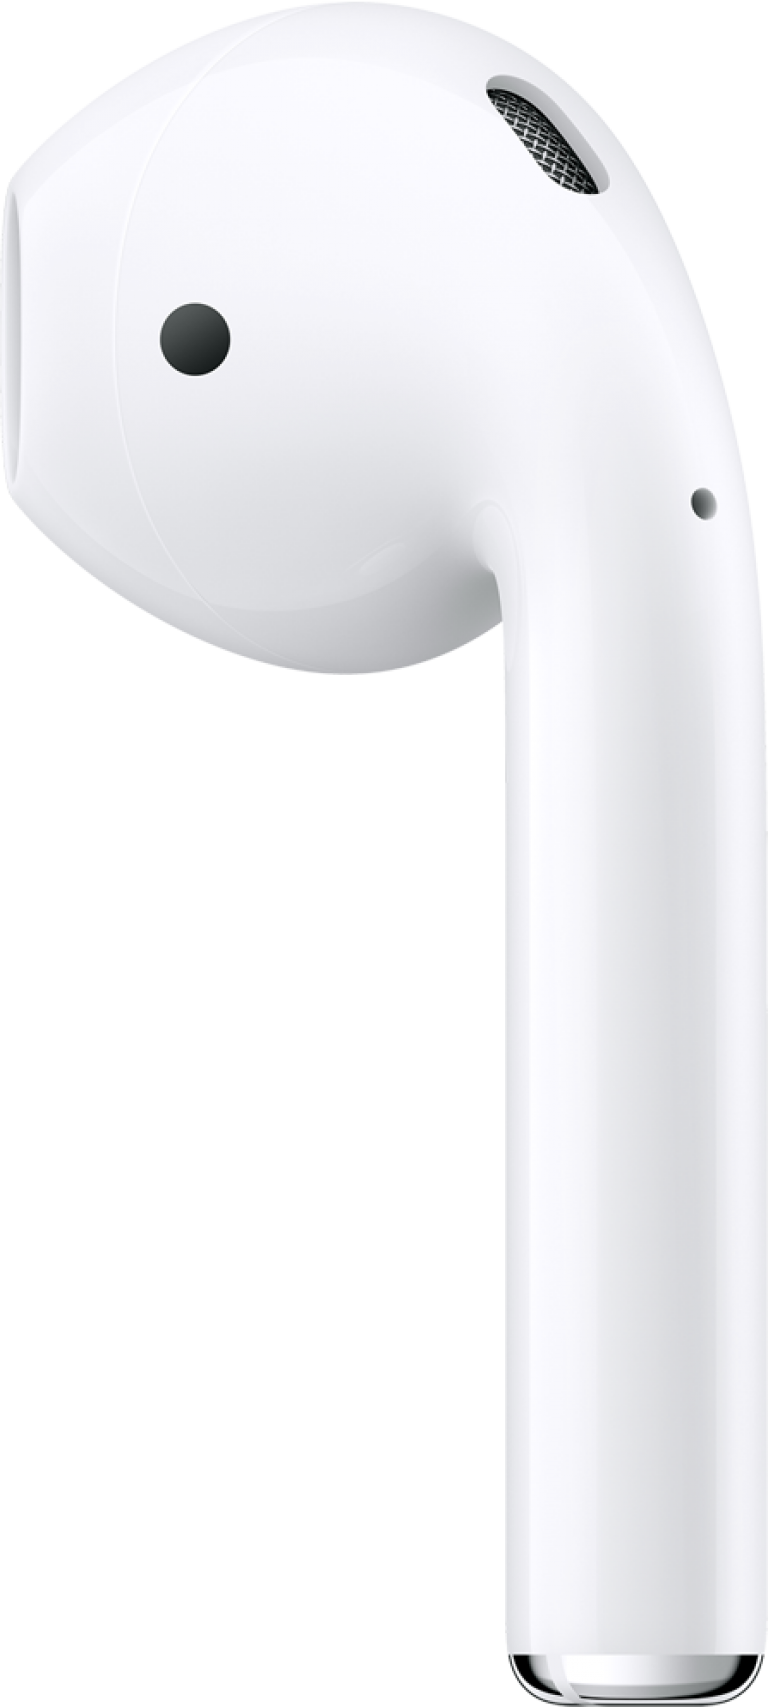 Airpods Free Clipart HQ PNG Image